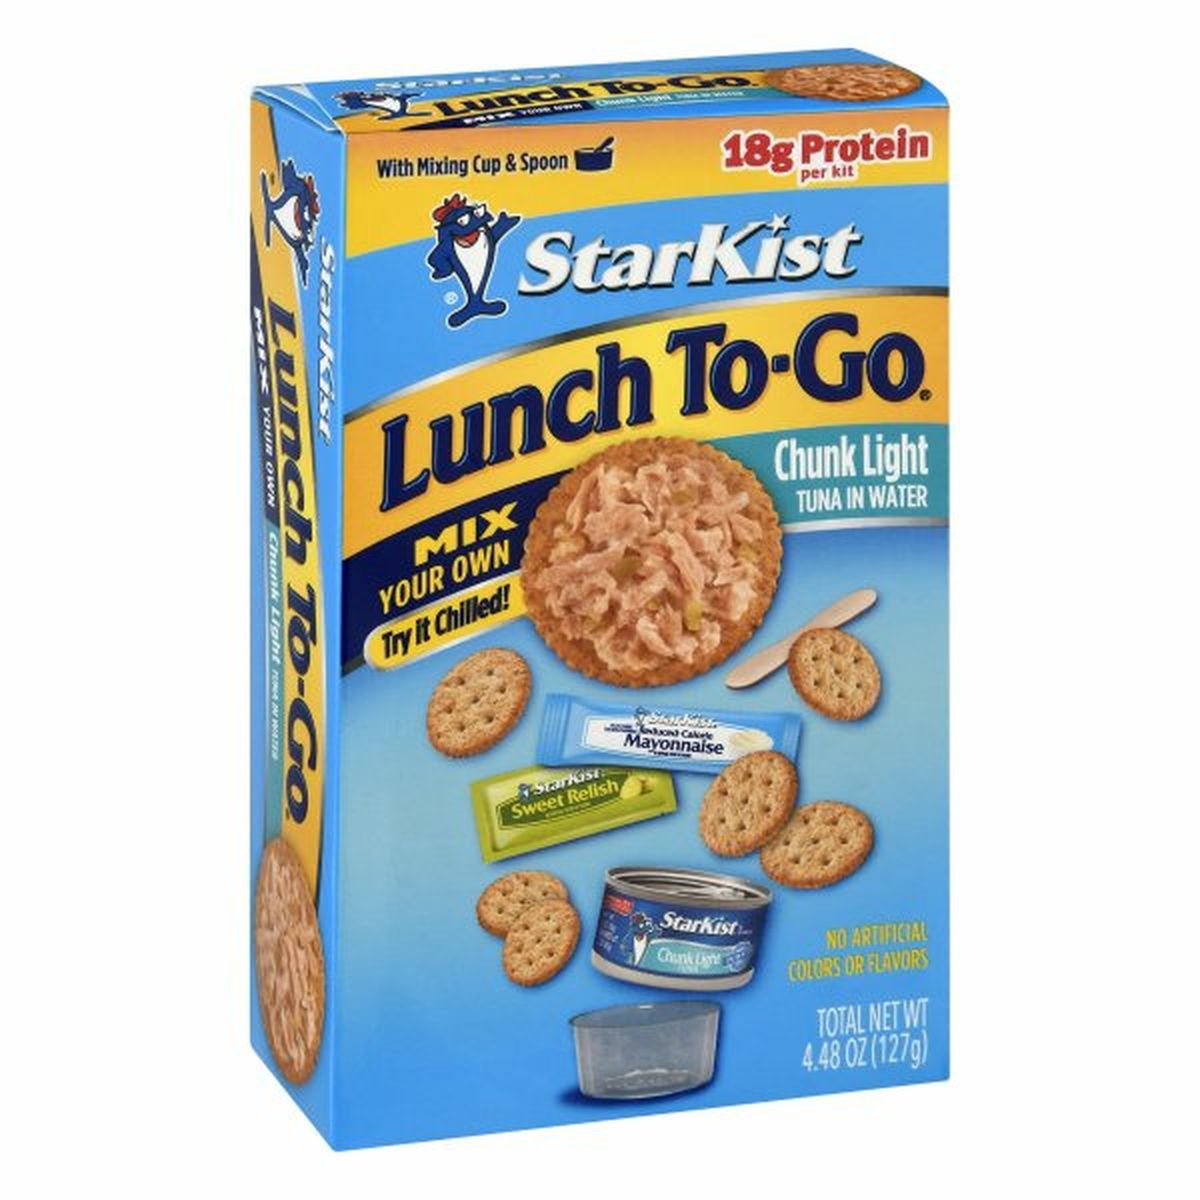 Calories in StarKist Lunch To Go, Chunk Light Tuna in Water